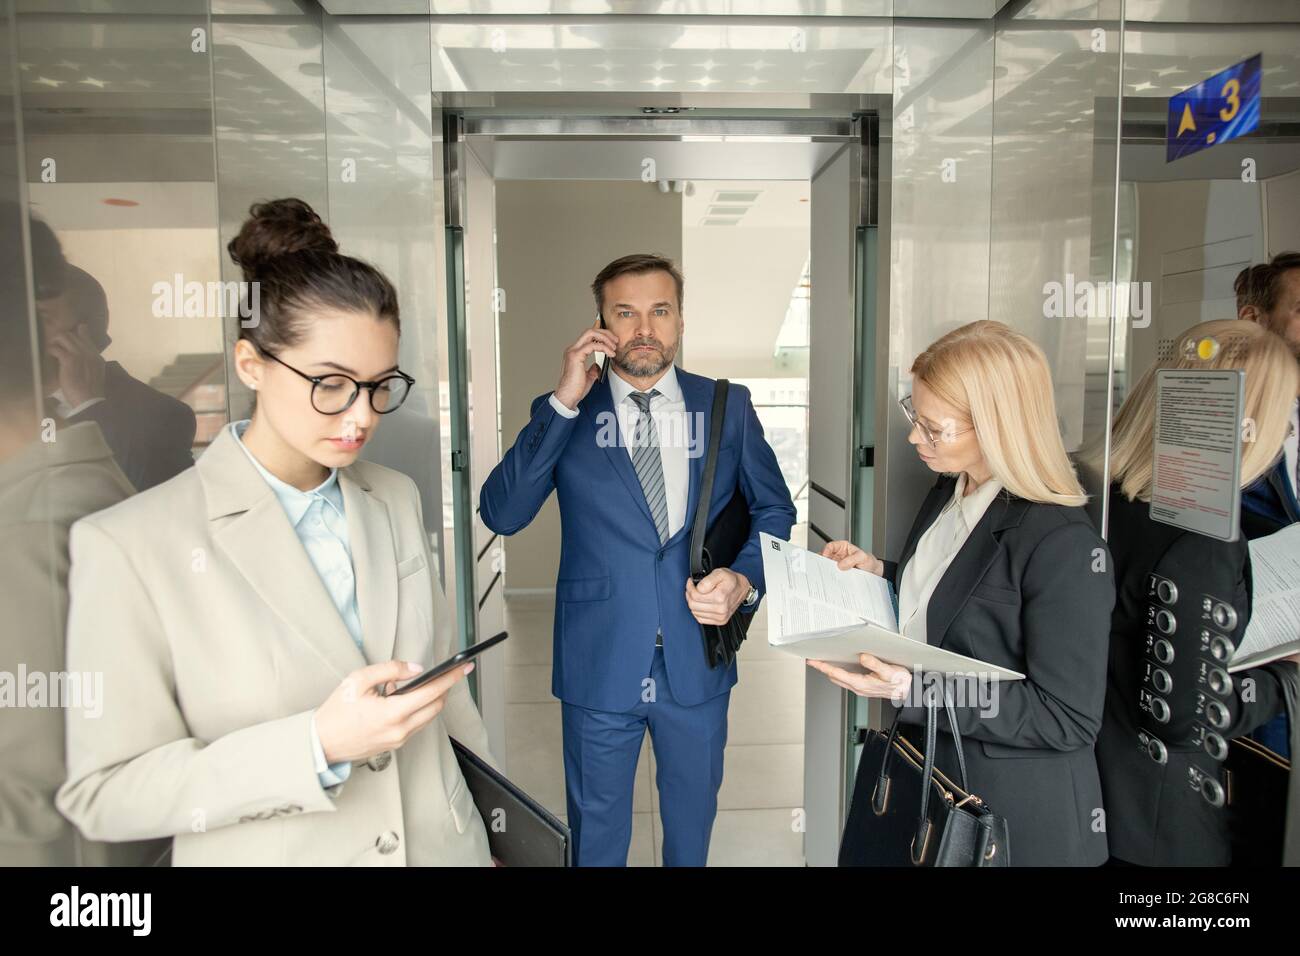 Businessman in suit talking on mobile phone while going into the elevator with other people standing in it Stock Photo